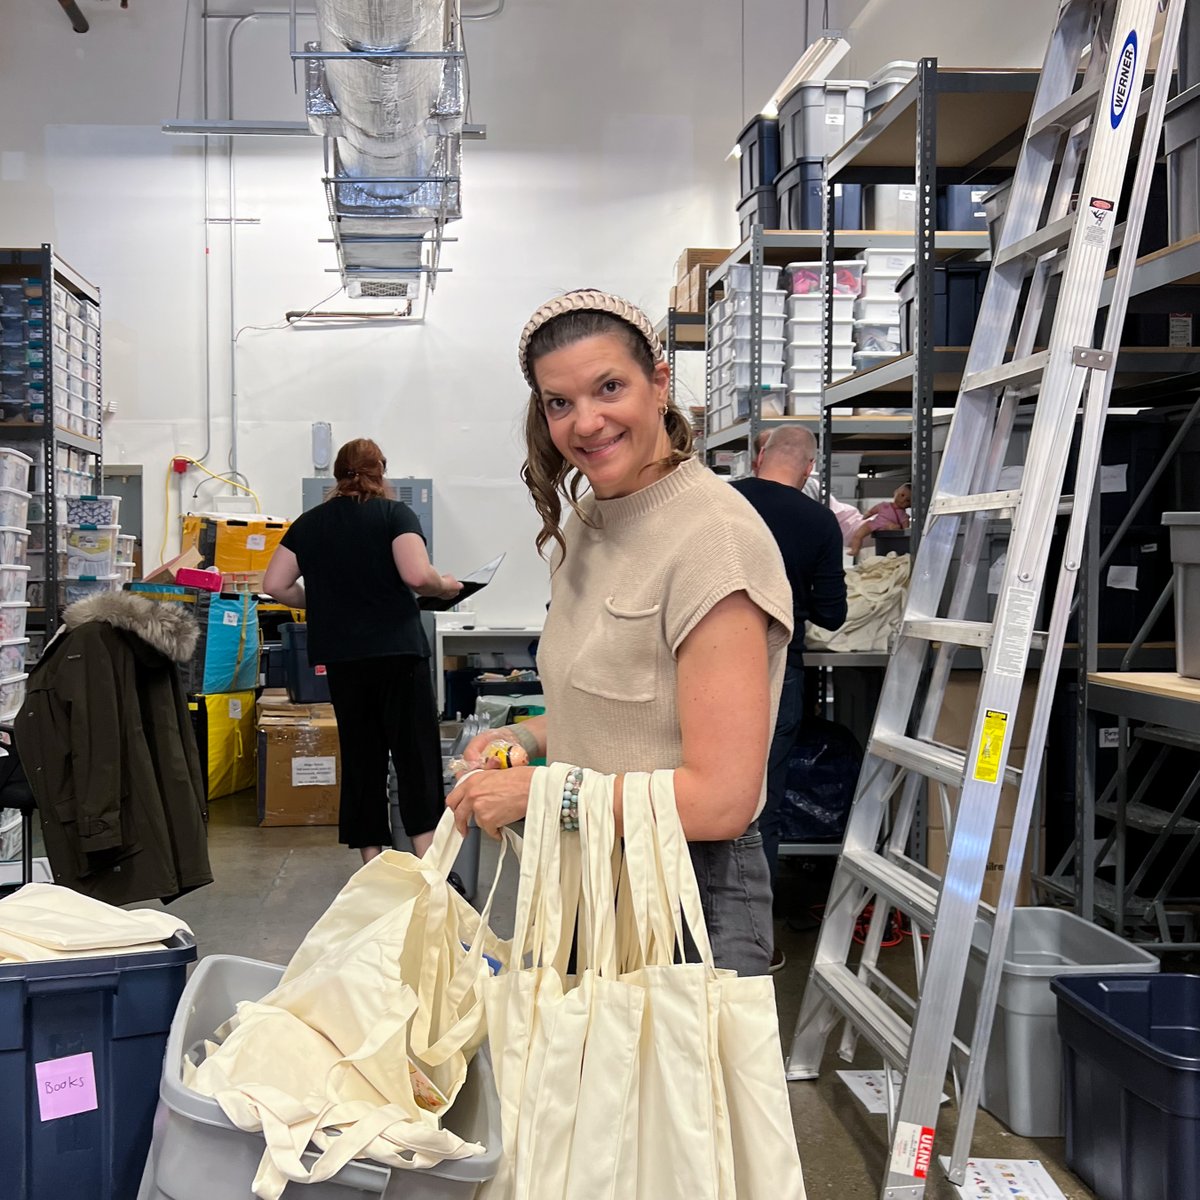 Several employees teamed up to sort and pack a range of items for distribution to families with children in the 0-3 age range in support of @RoomtoGrow_org's mission to address the of needs those raising children in these early years.

Get involved: lnkd.in/exn7pZSf